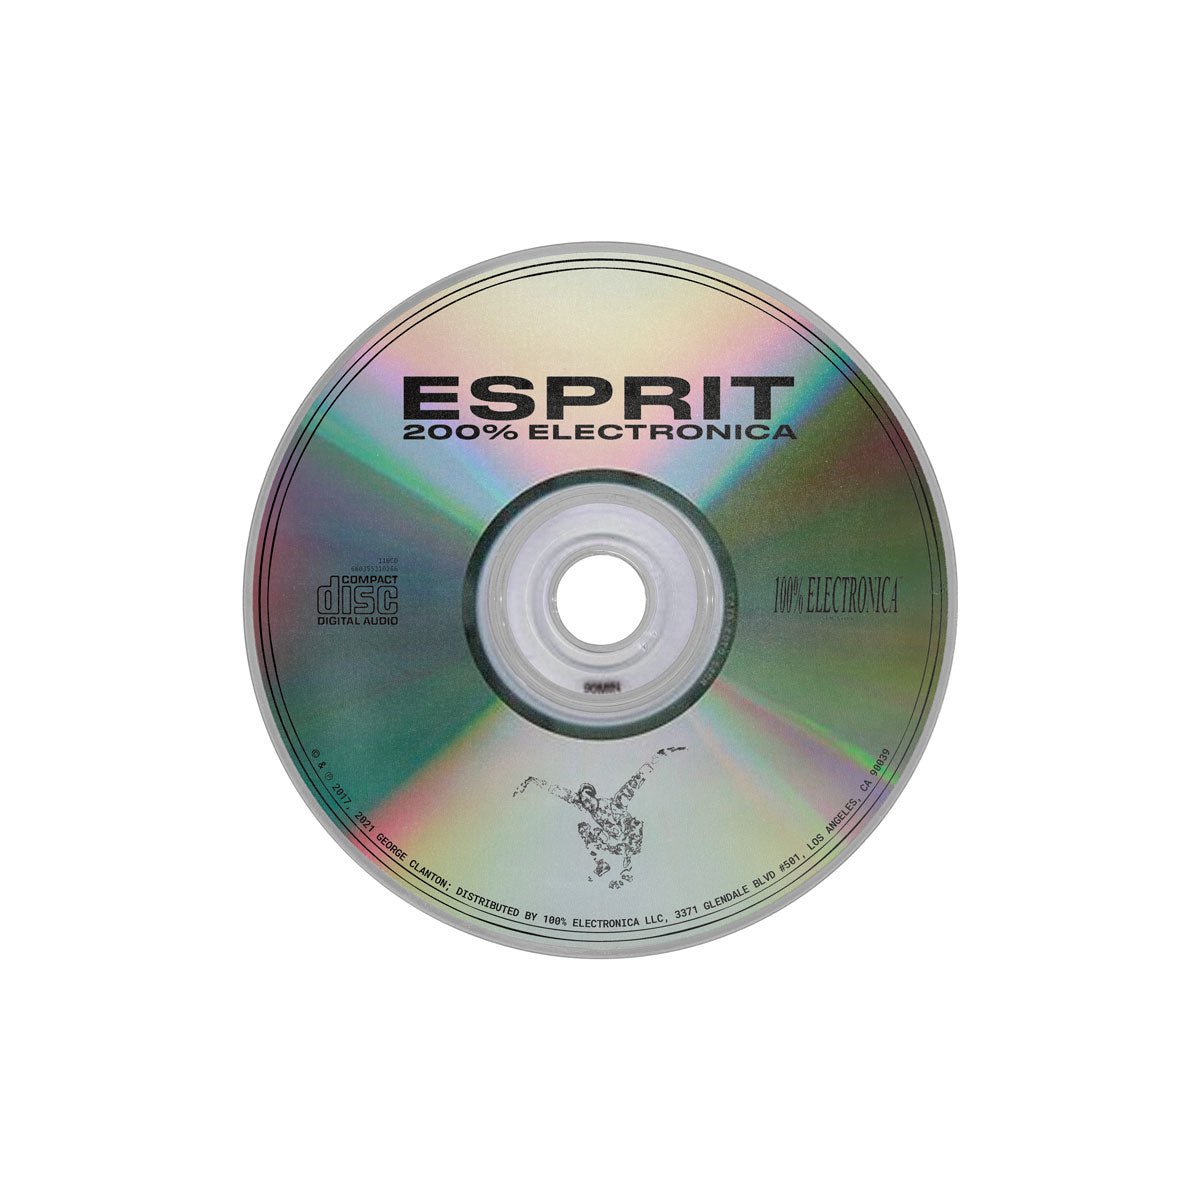 ESPRIT 空想 - 200% Electronica CD - 100% Electronica Official Store (Photo 2)